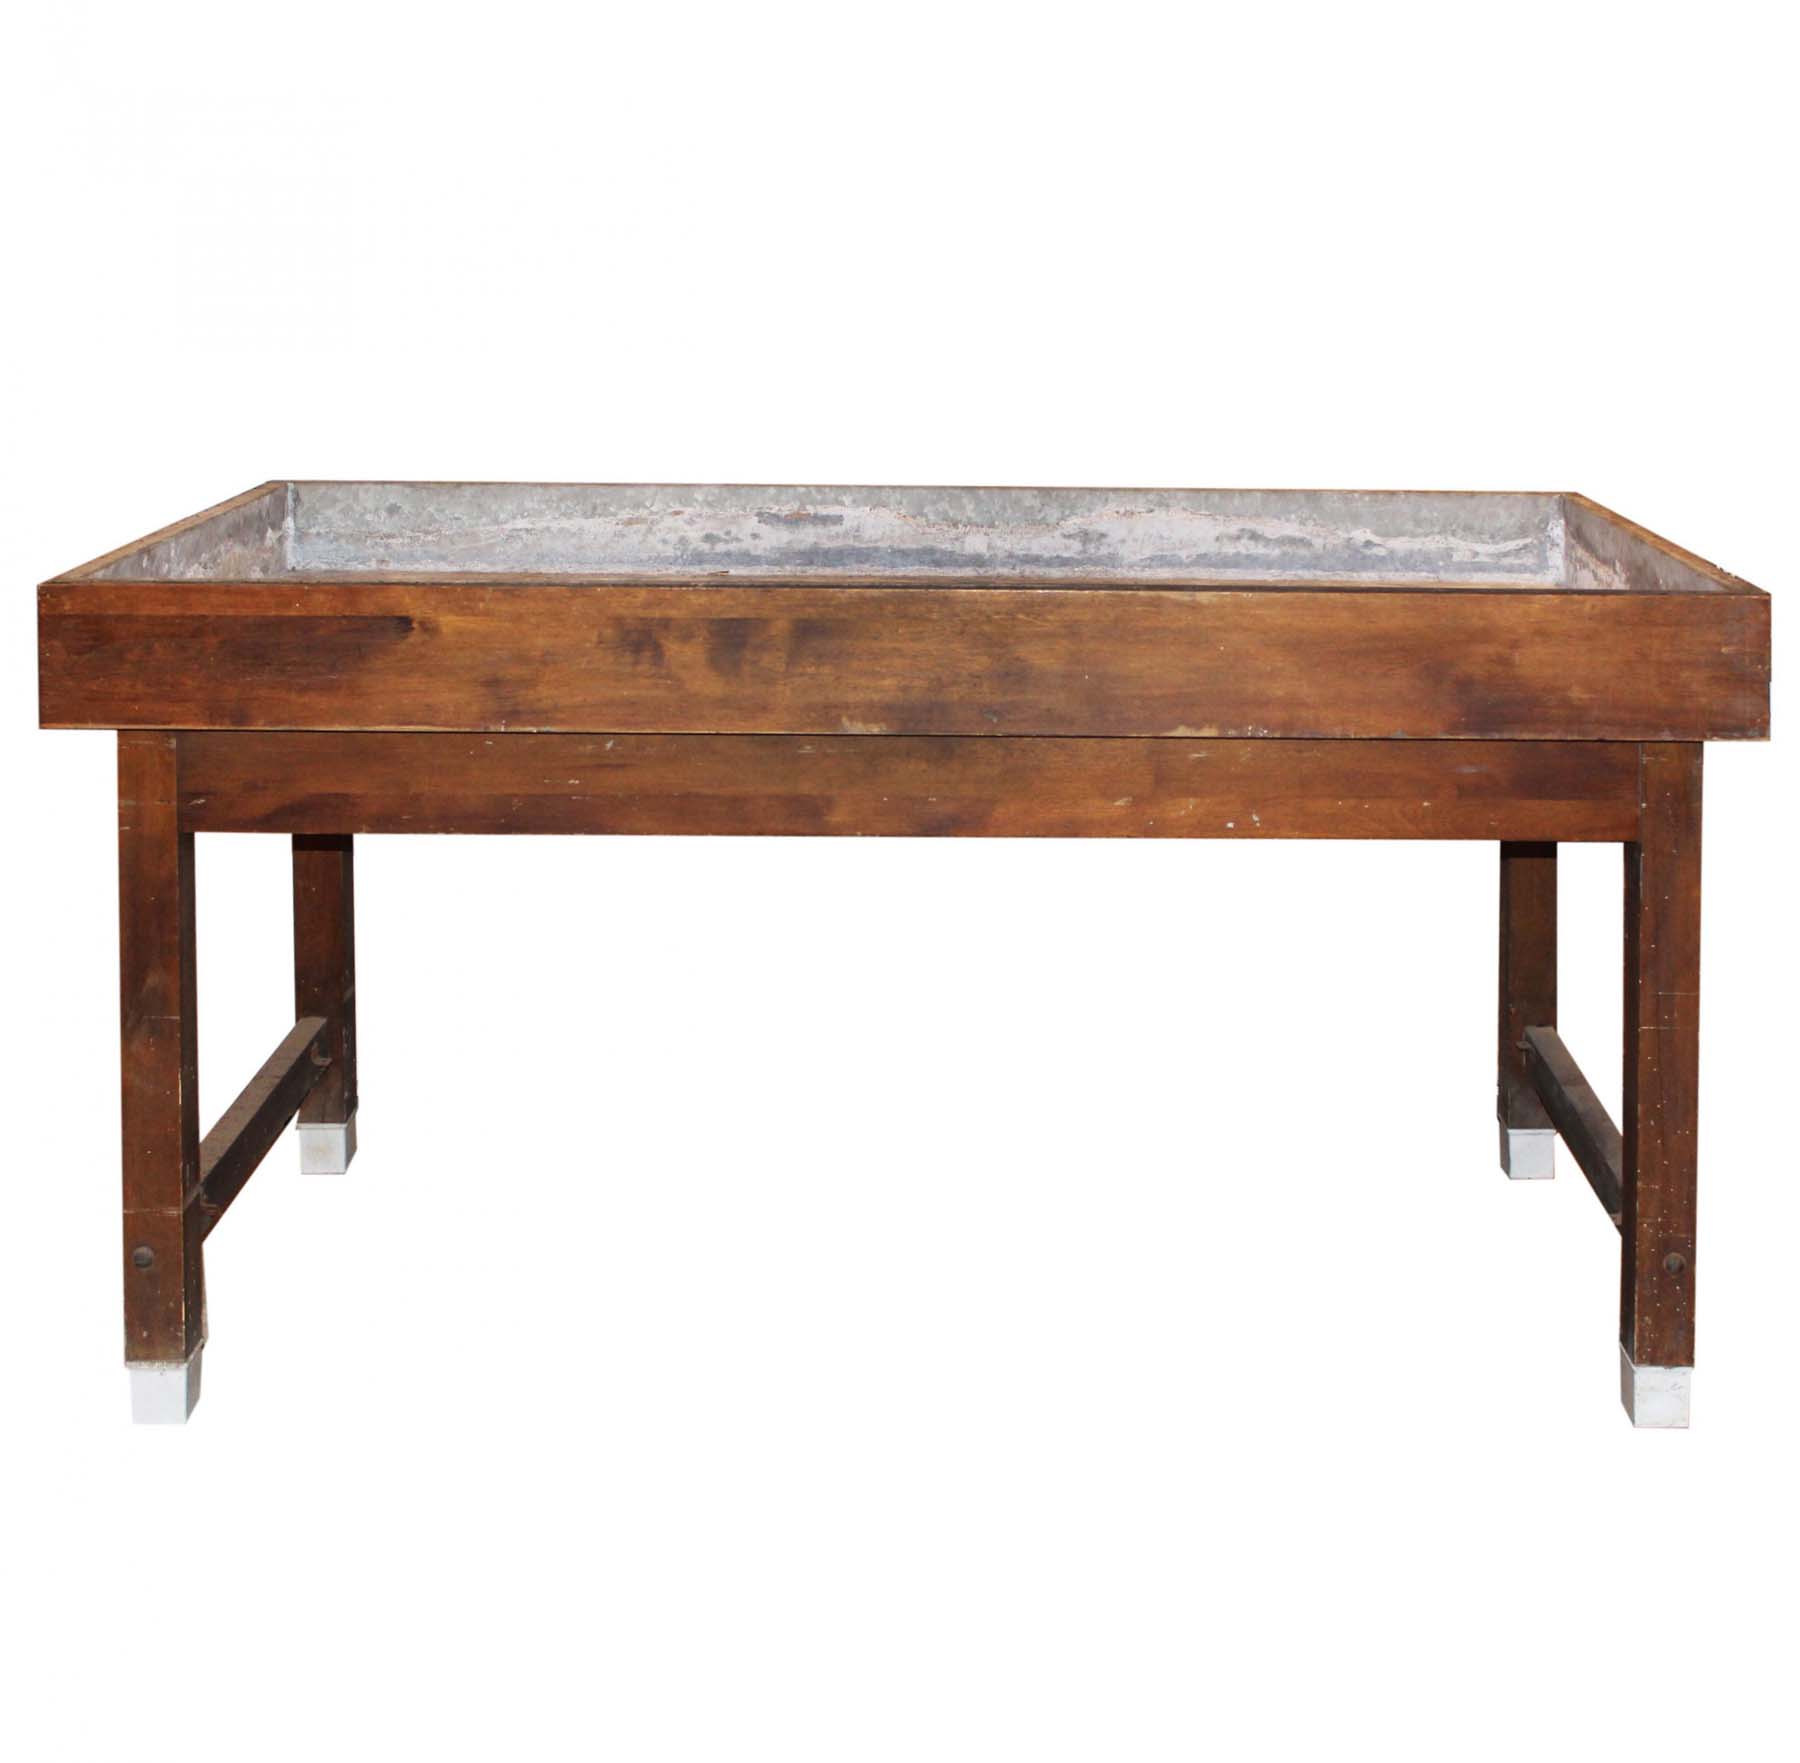 SOLD Large Salvaged Antique Work Table, Wiese Laboratory Furniture Co.-68248